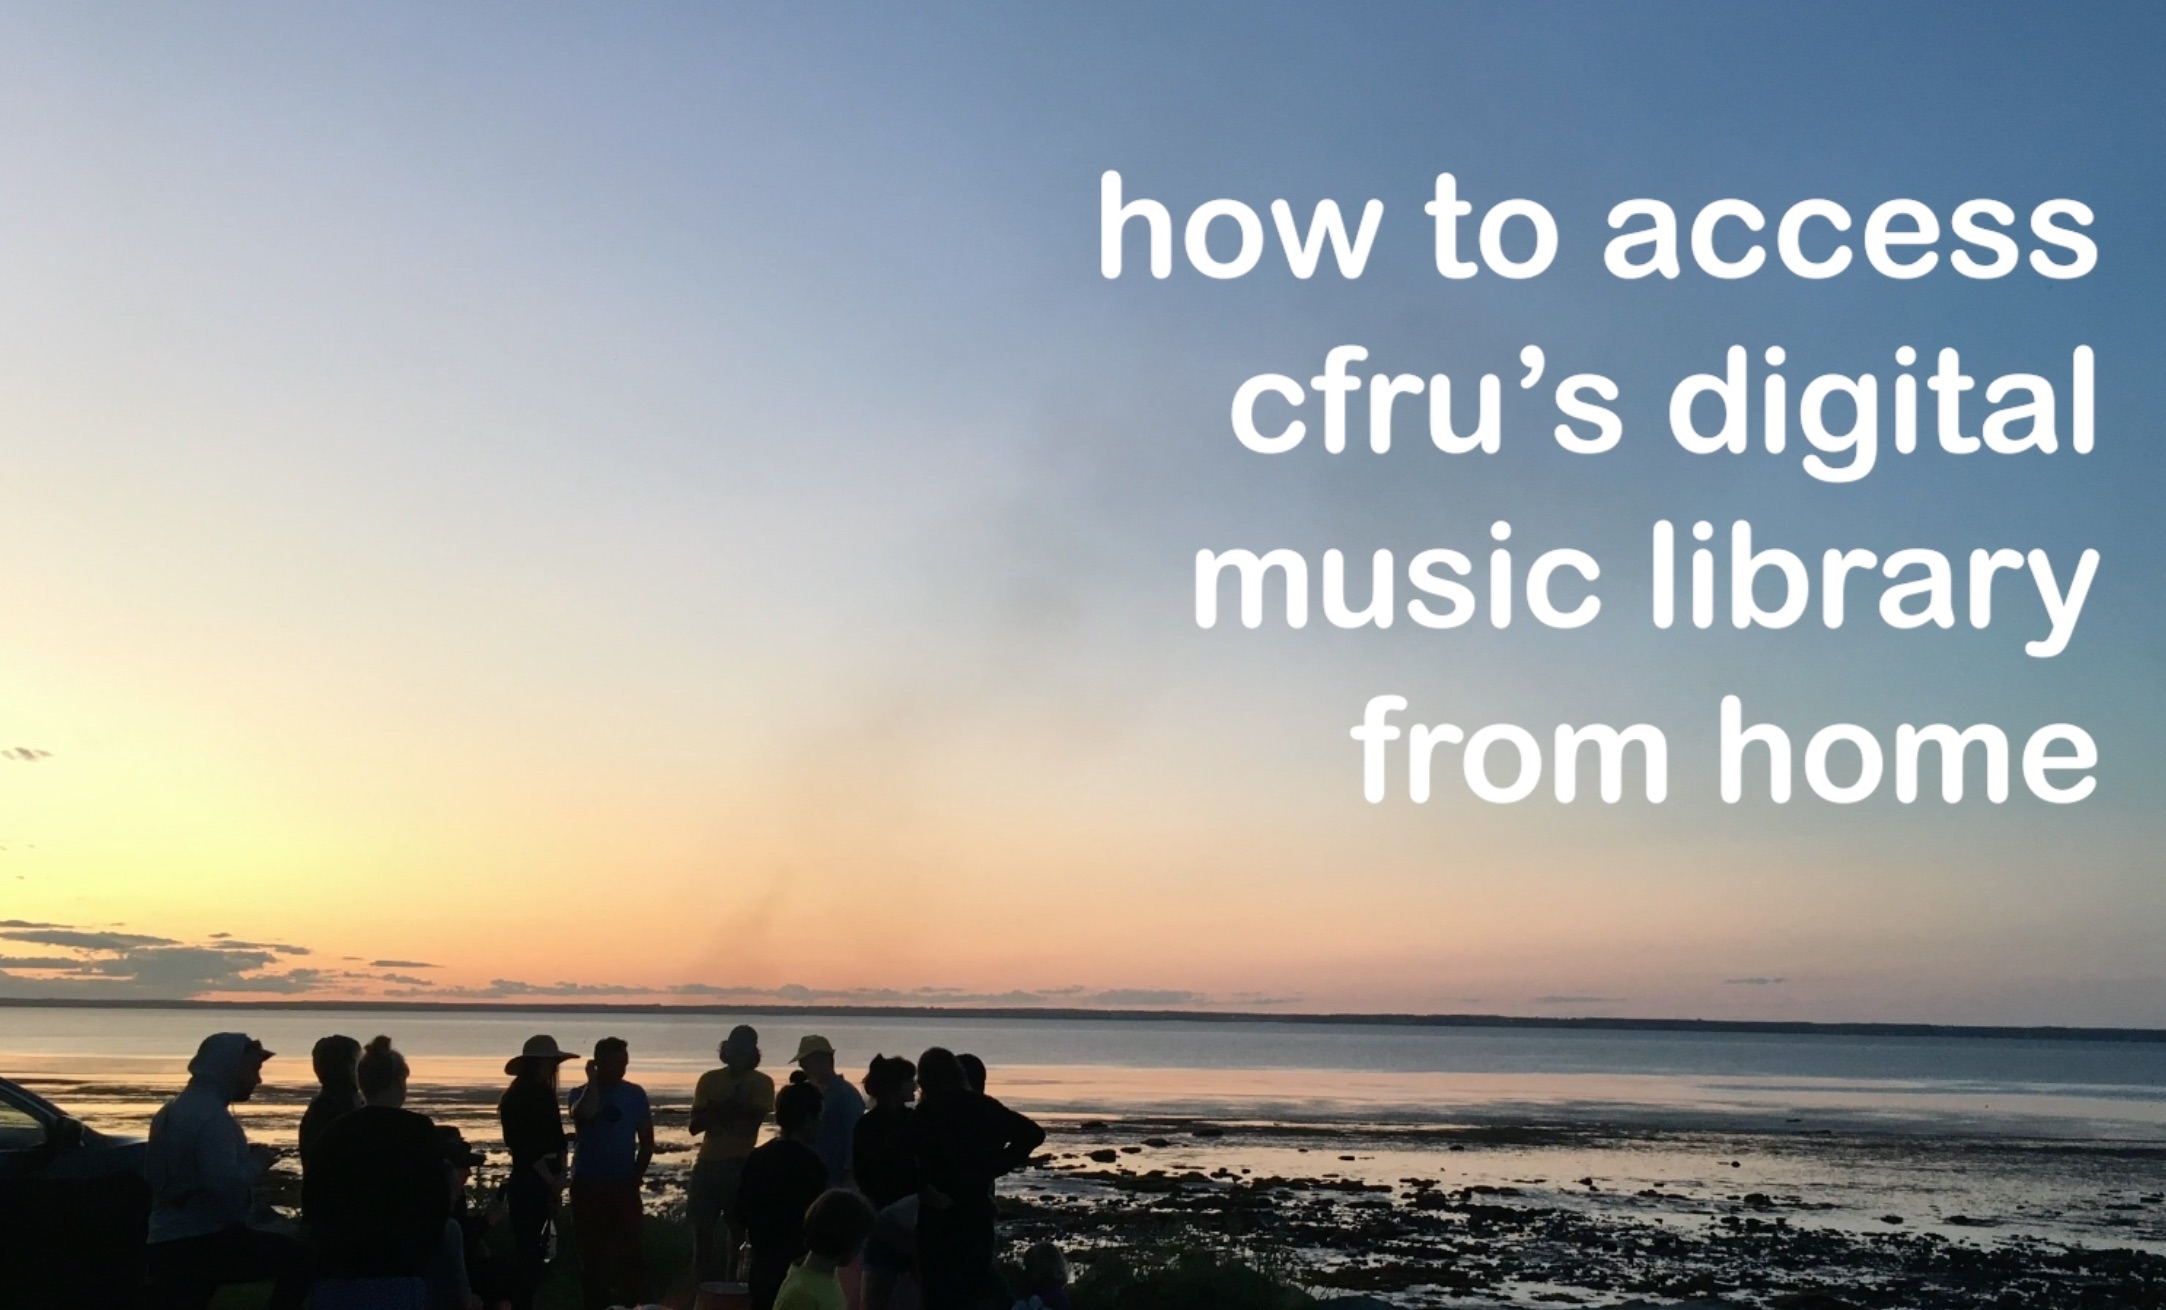 Learn how to access CFRU's music library from home.